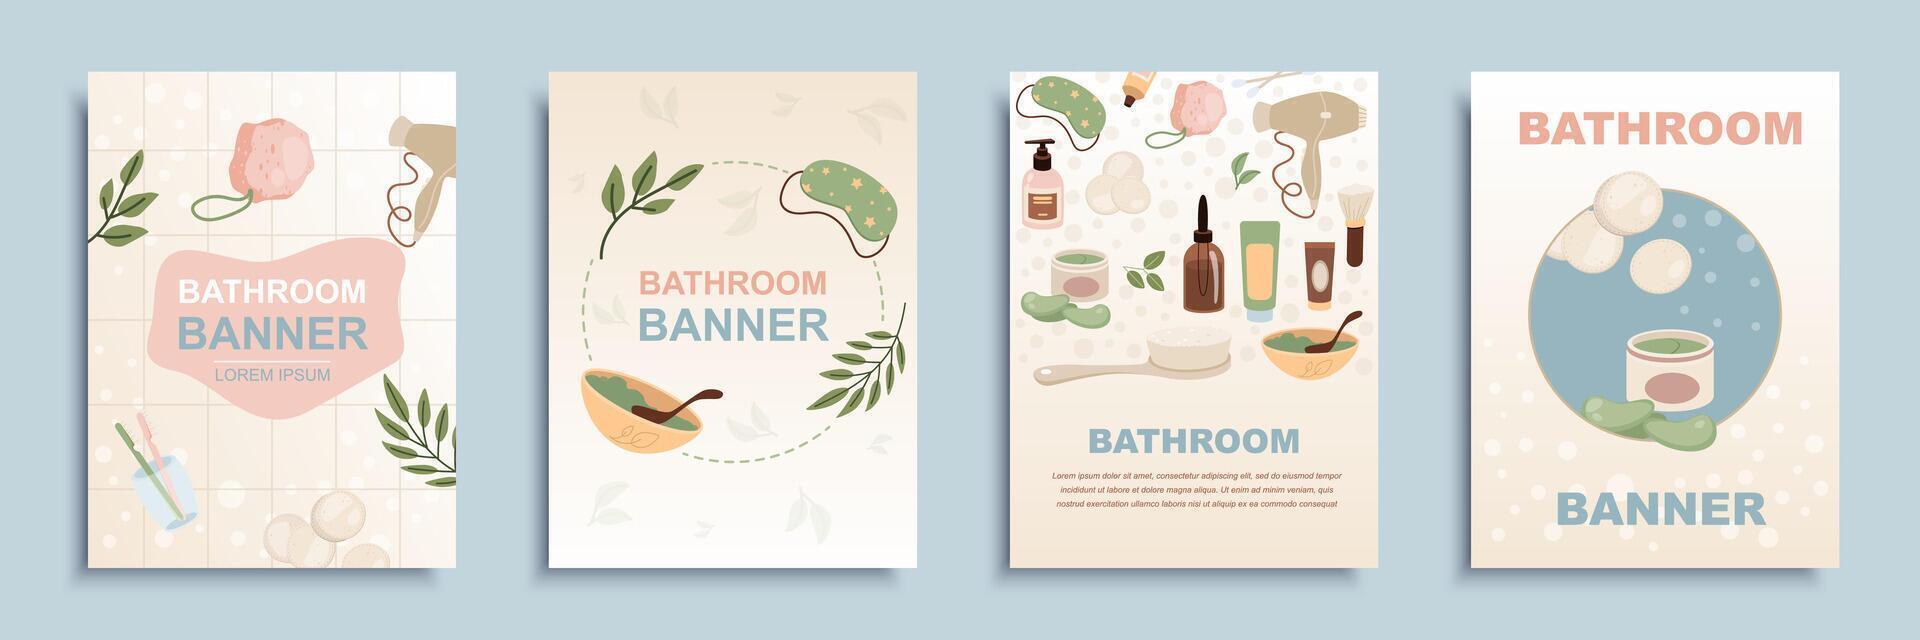 Bathroom cover brochure set in flat design. Poster templates with ...